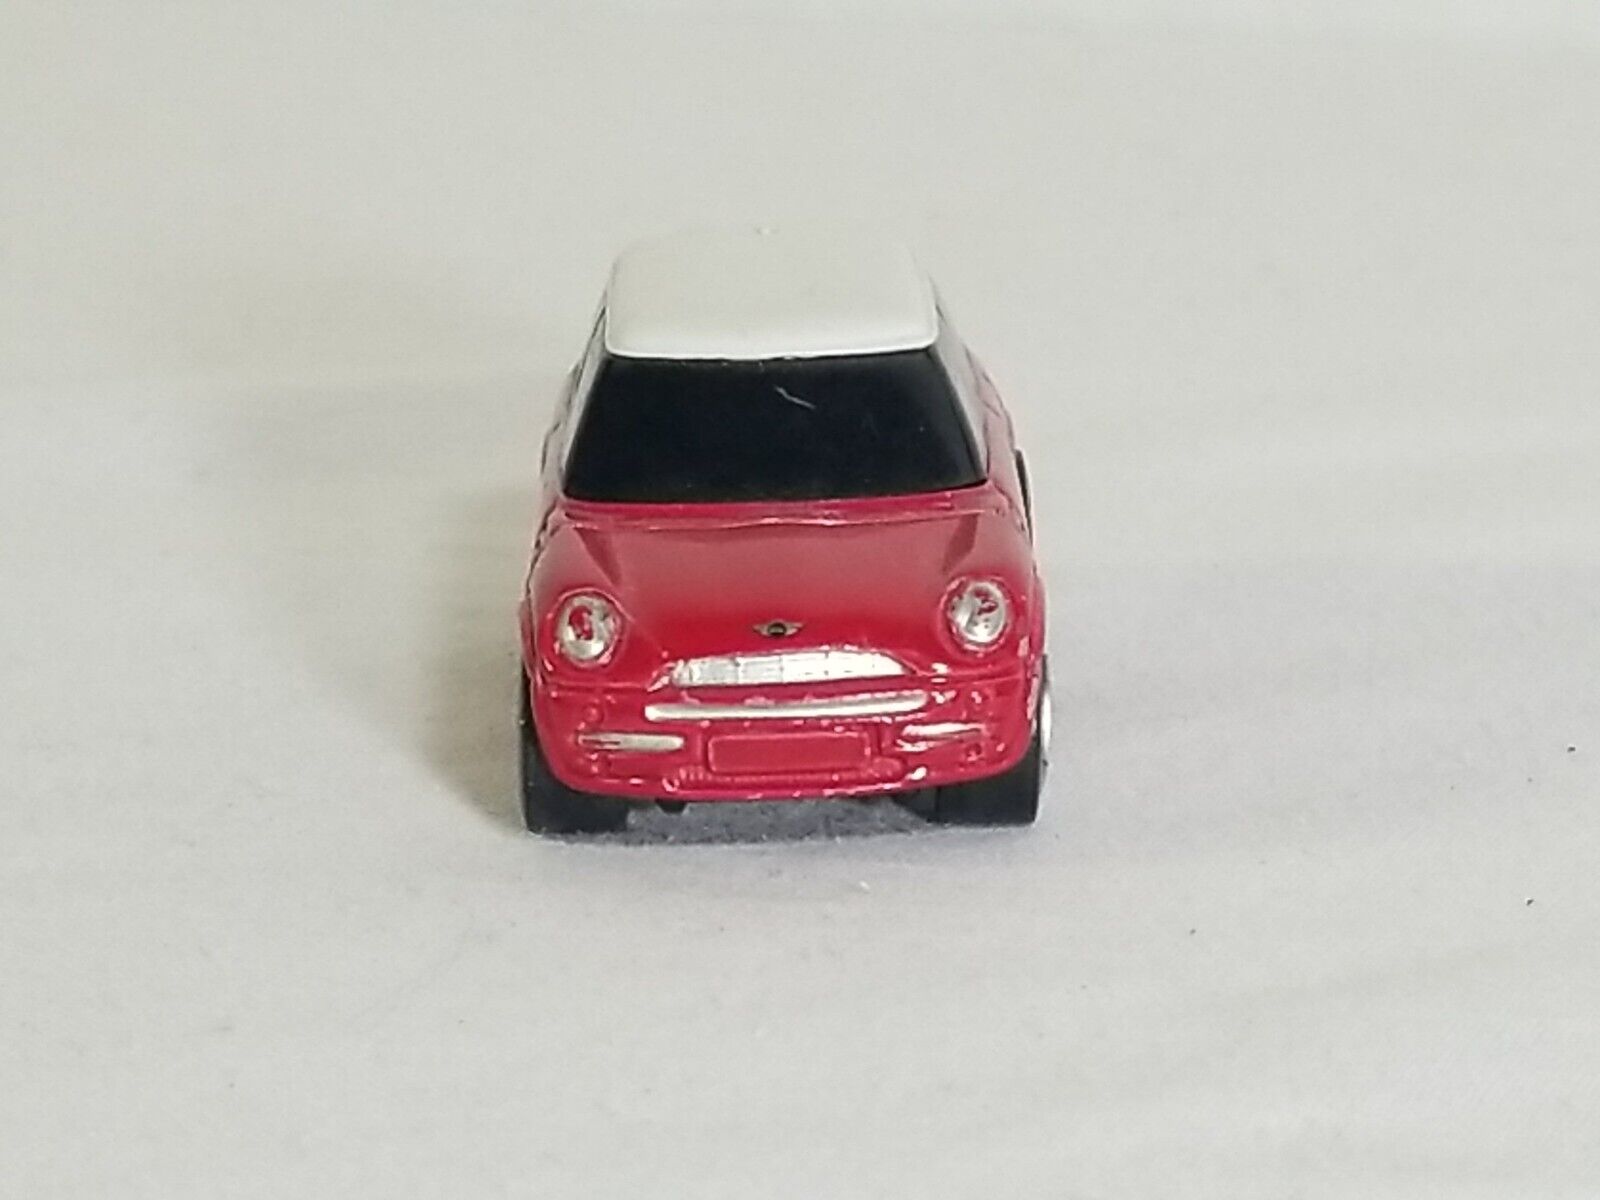 Maisto Transit Authority Mini Cooper Car Red With White Top Scale 1:64 2002